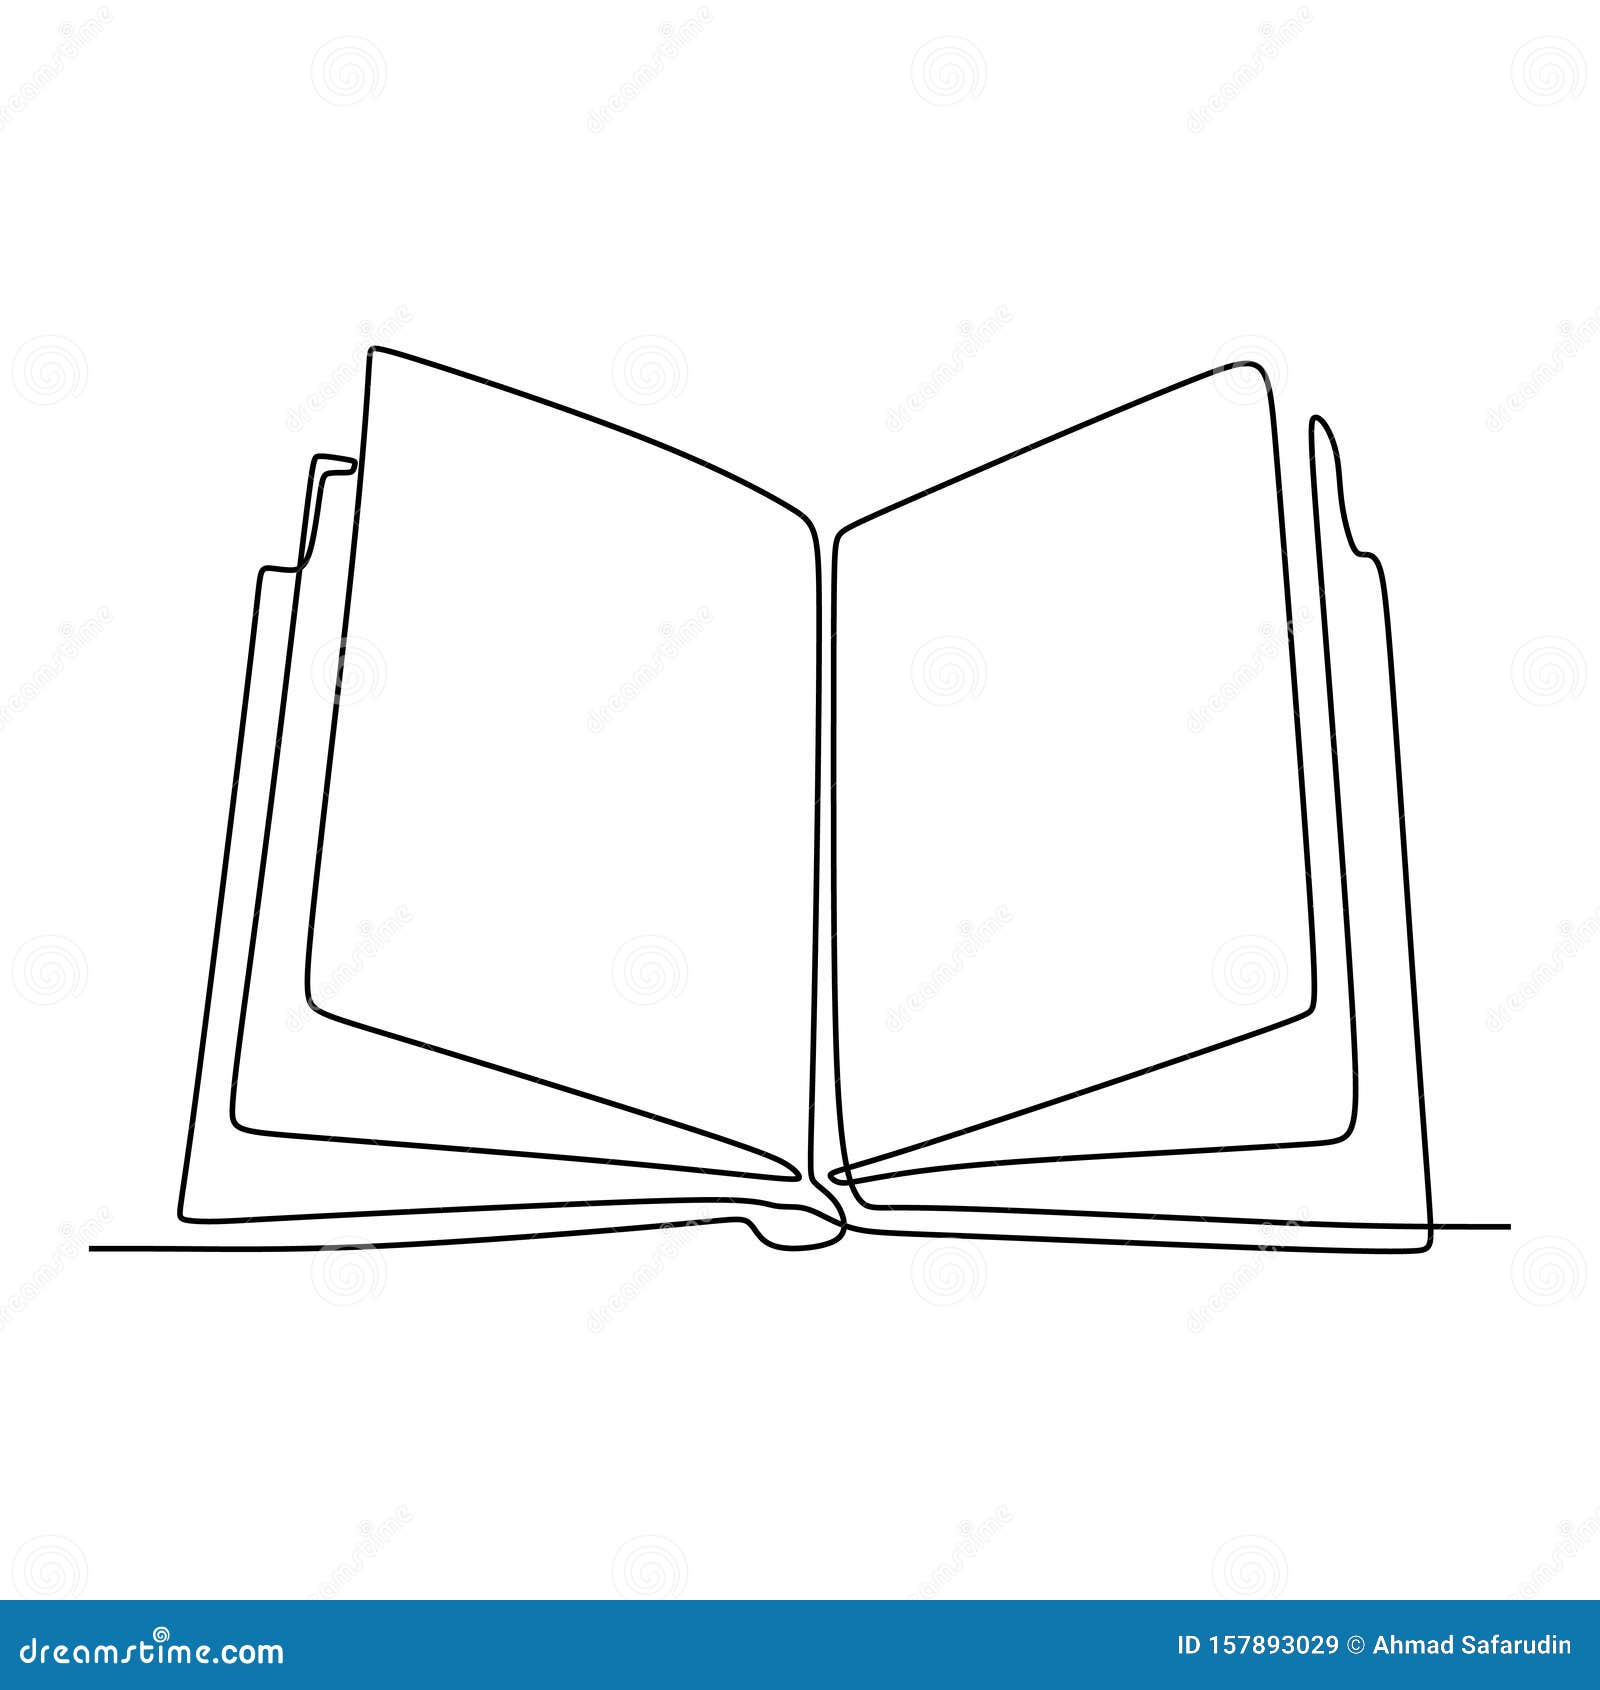 Continuous line drawing open book page design